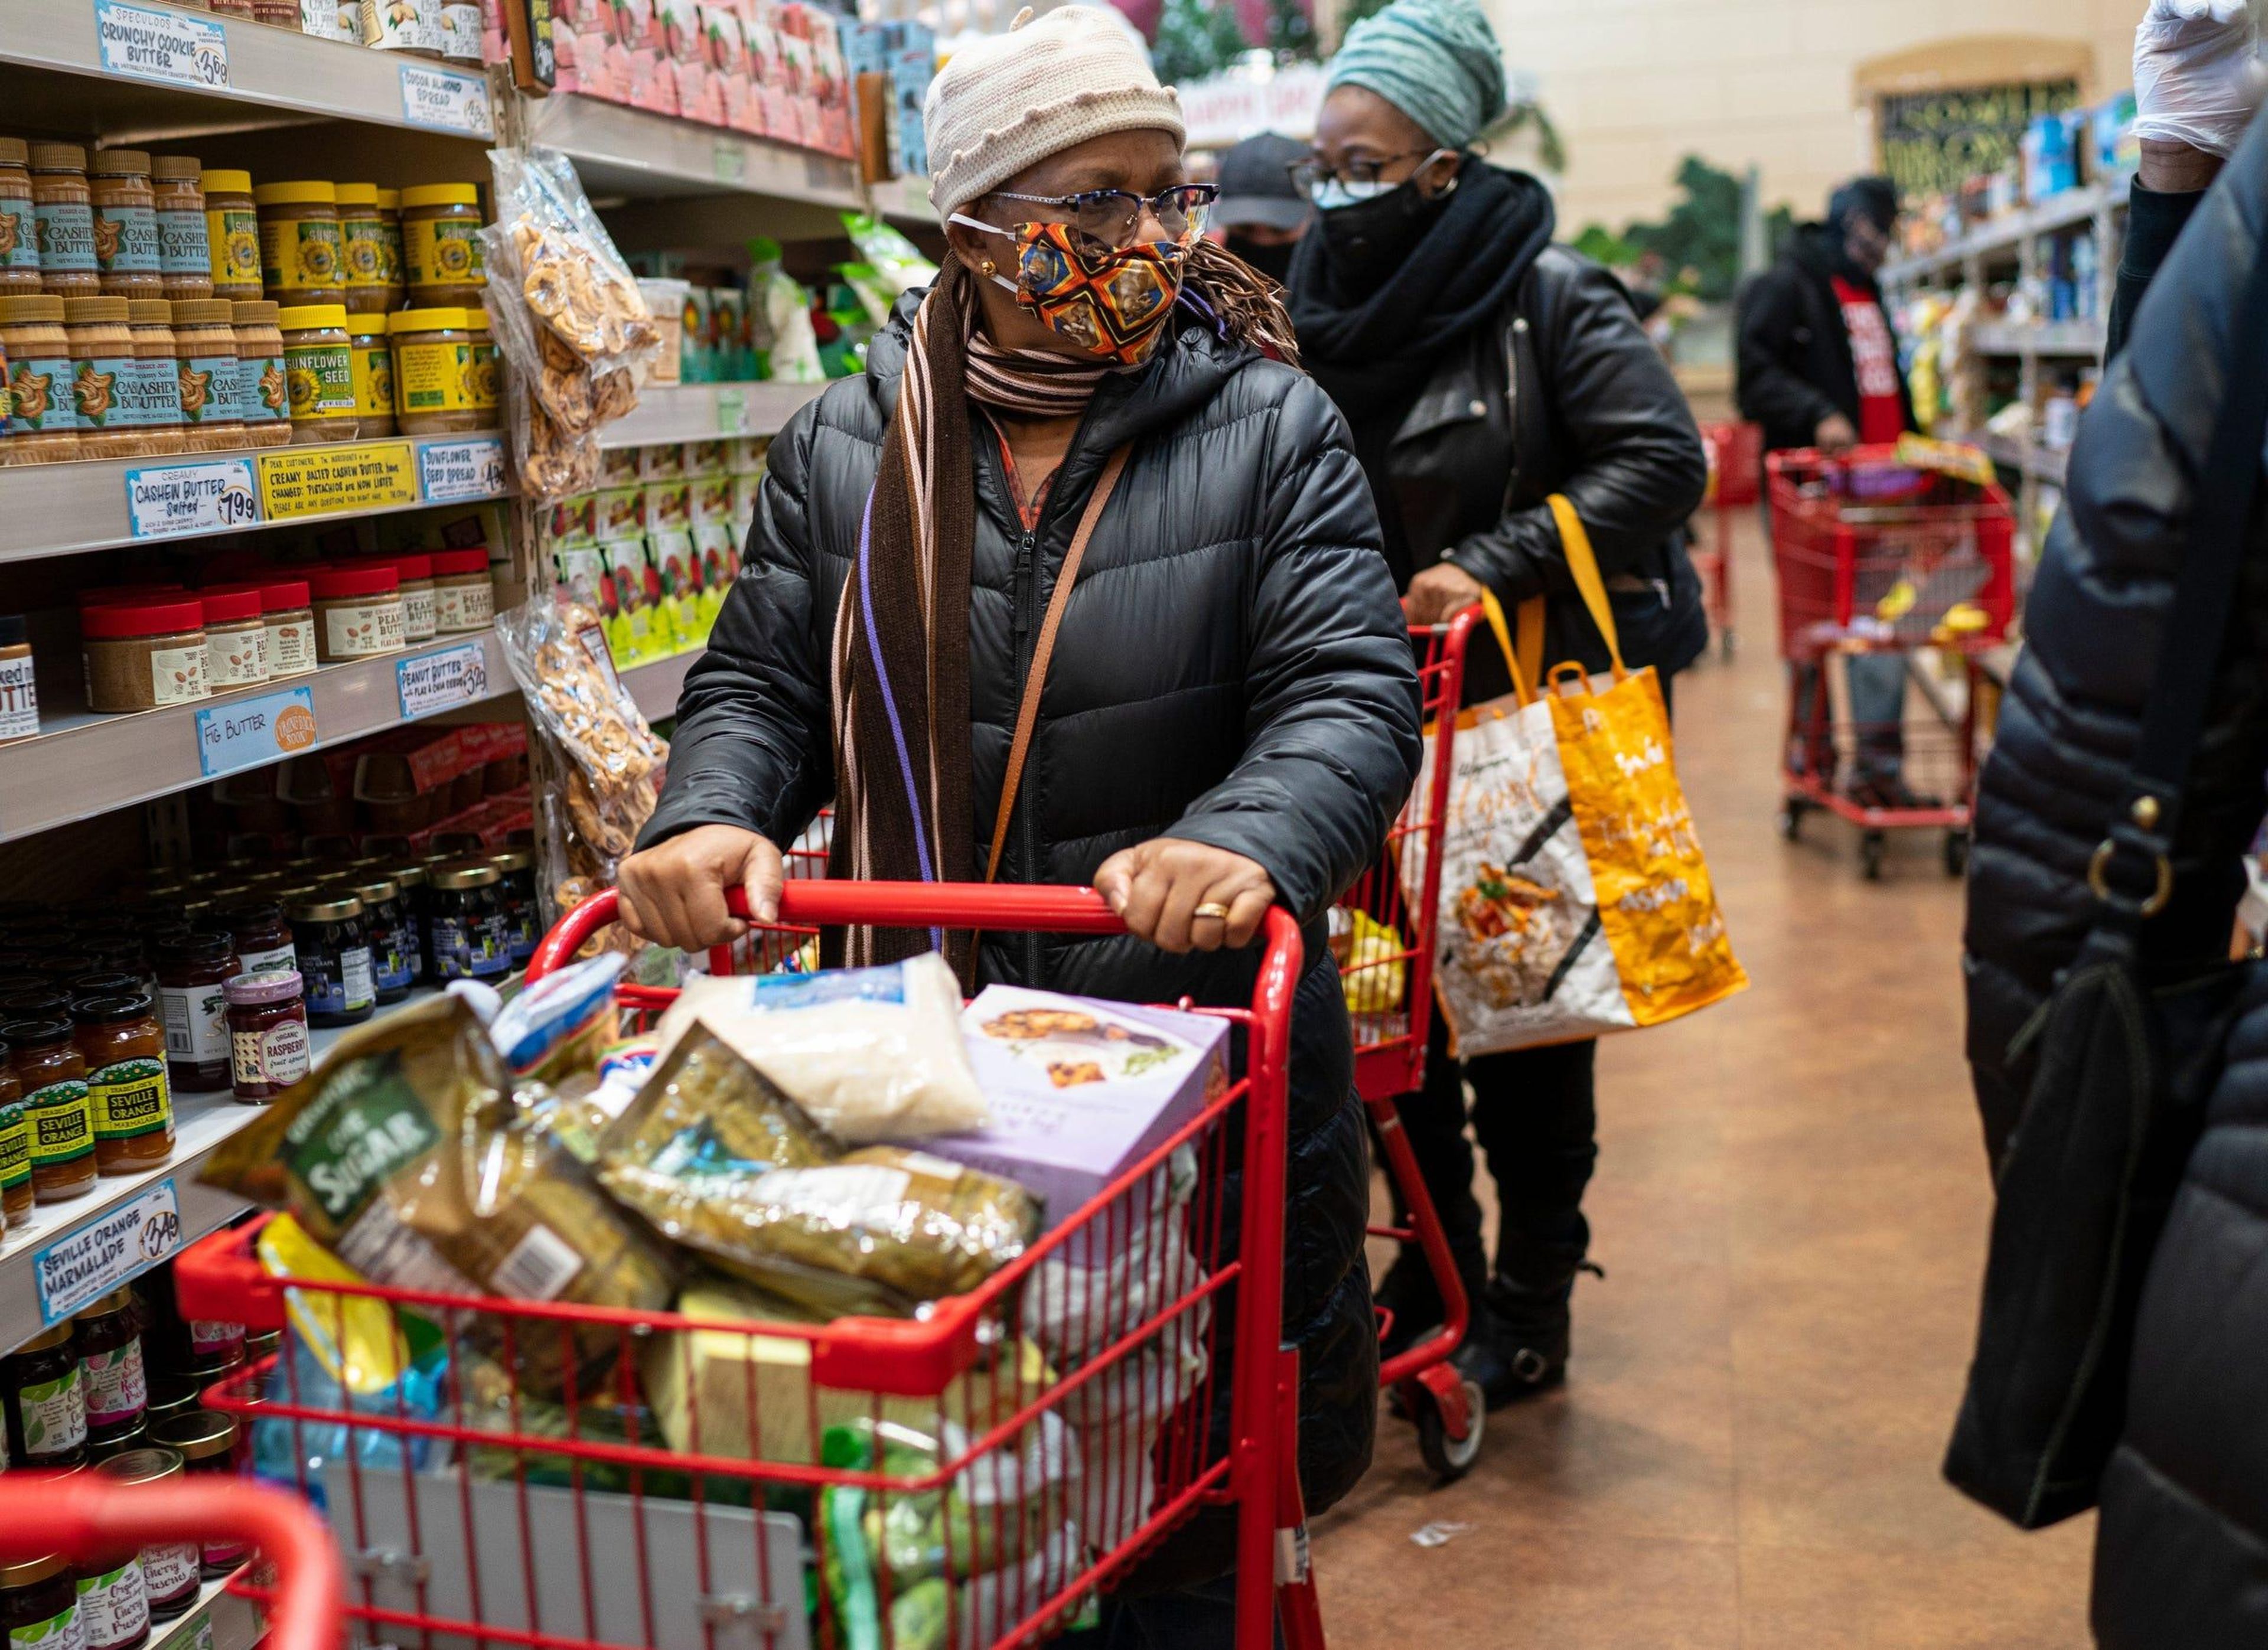 A woman wearing a mask moves her shopping cart in a Trader Joe's supermarket in New York City, December 3, 2020.